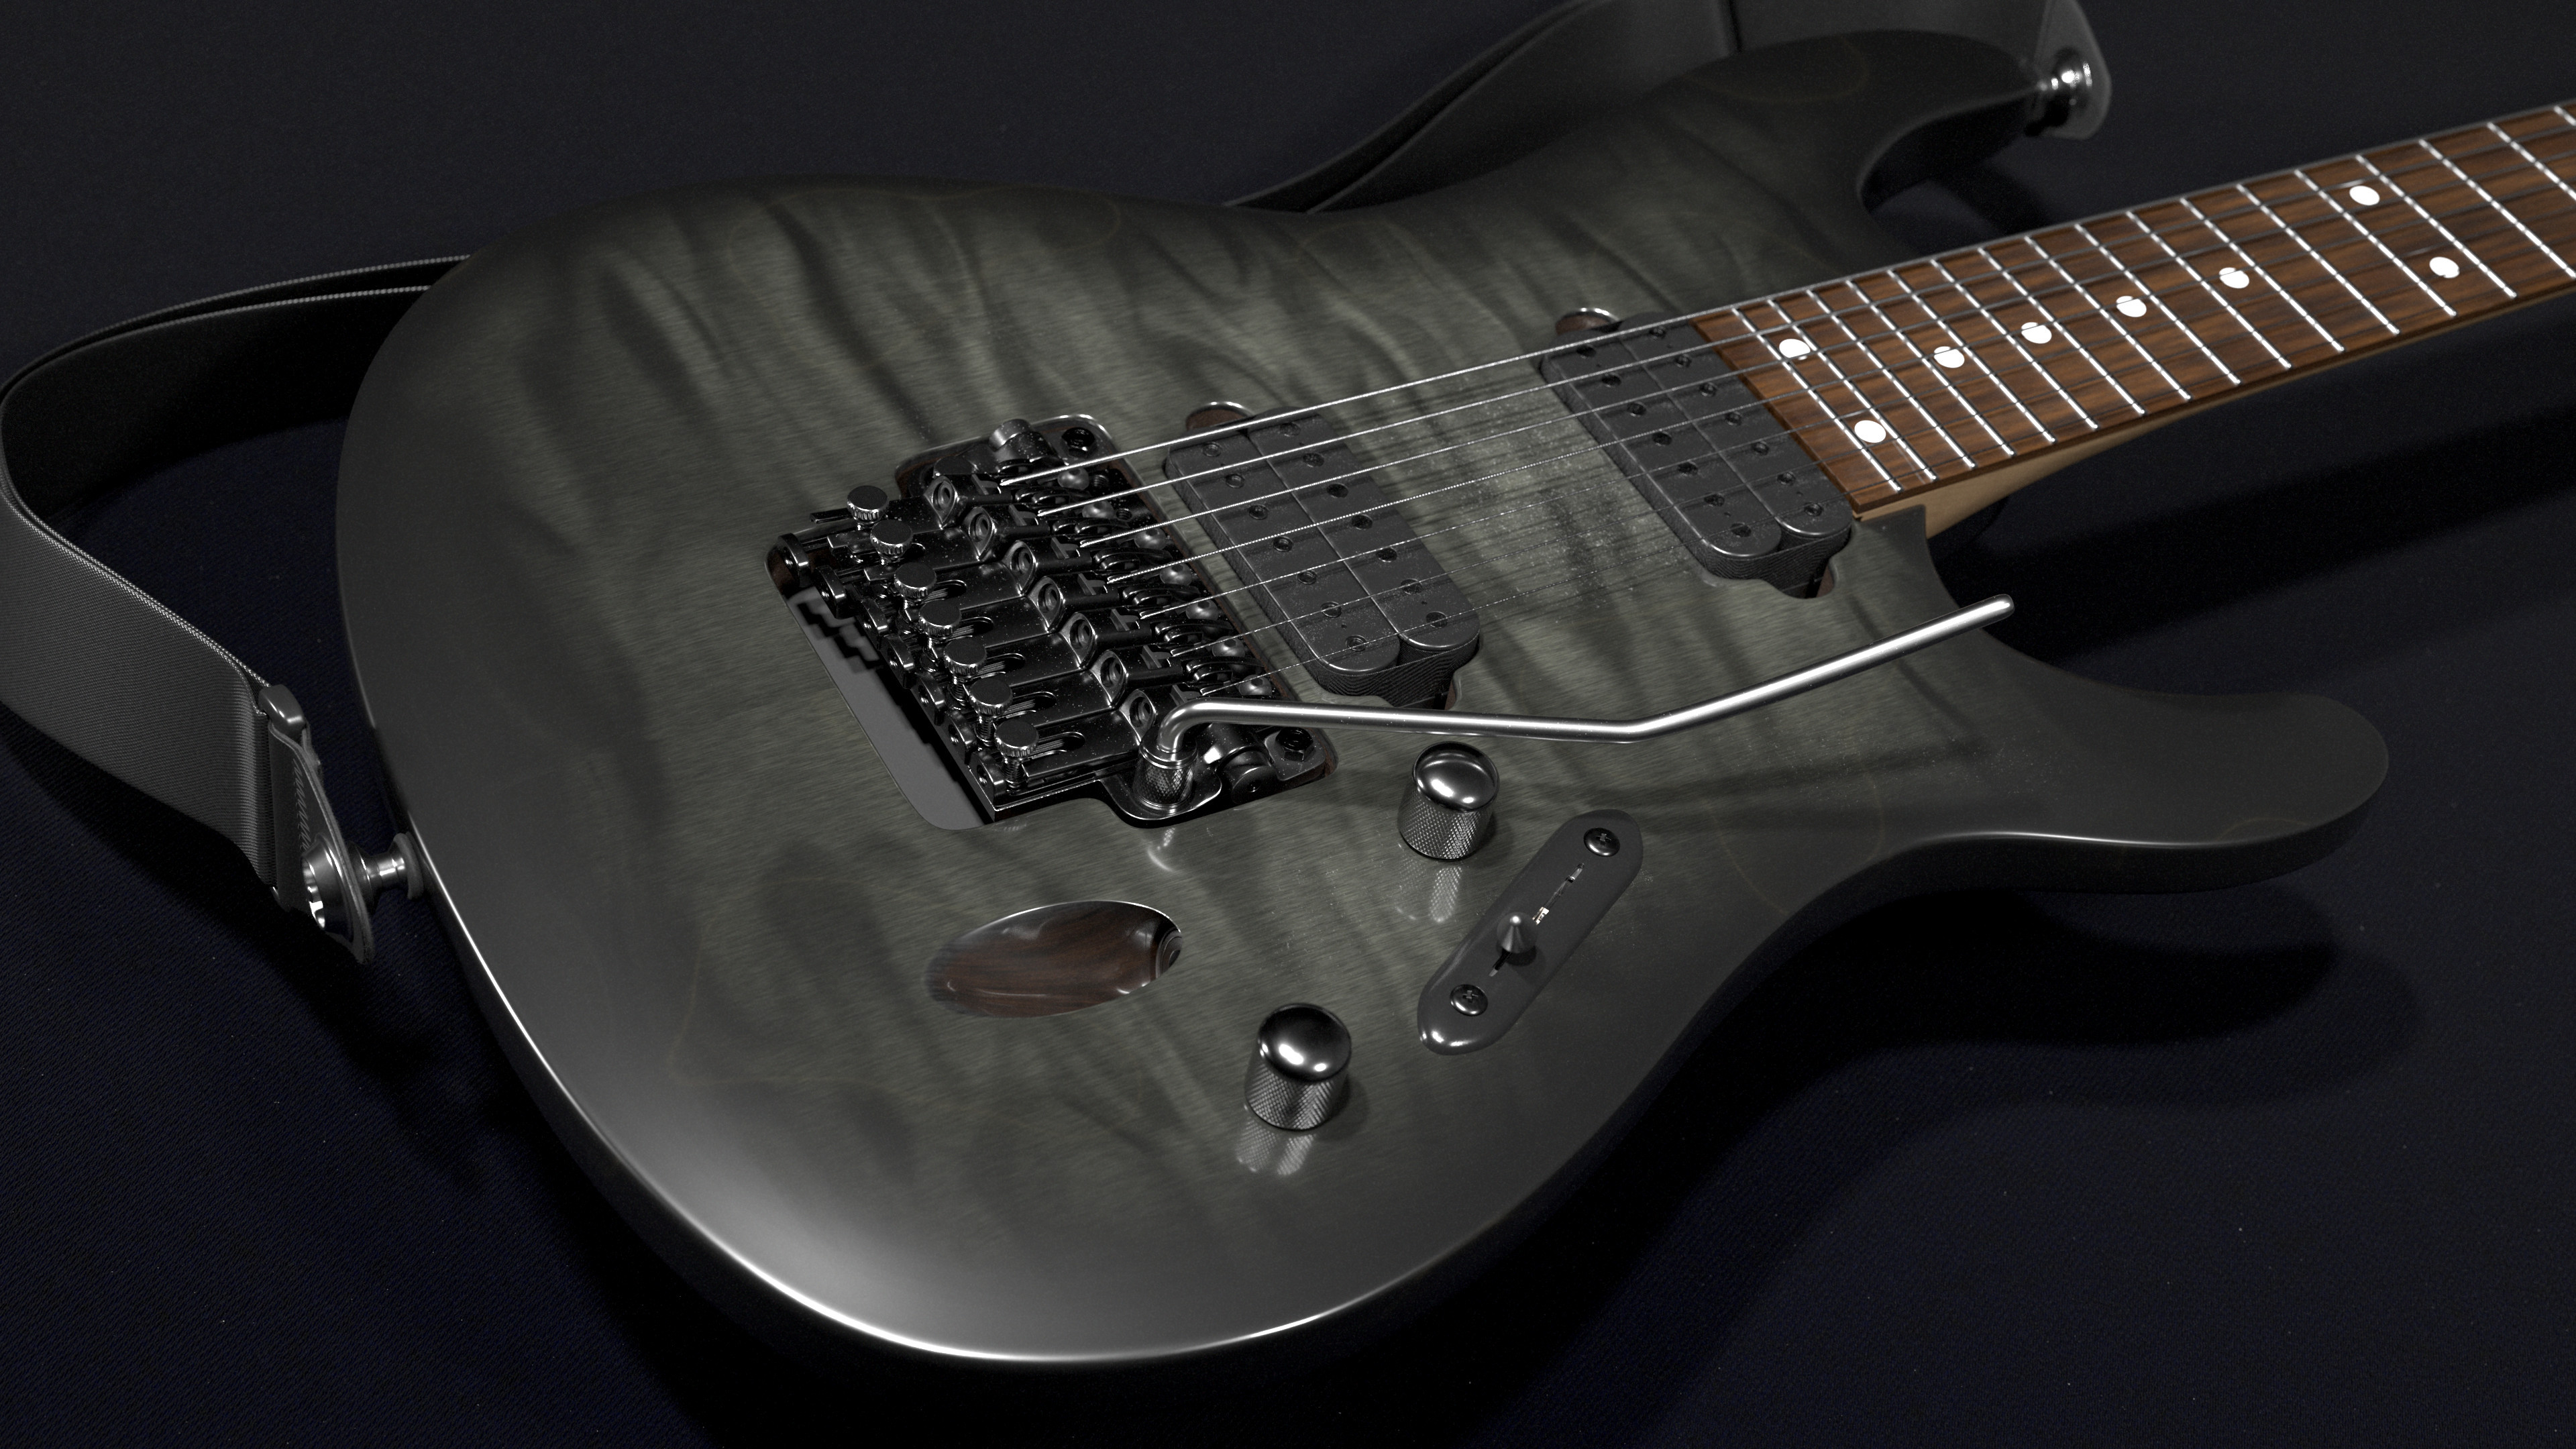 Rendered in Cycles. I tried to closely match Ibanez's guitar photography.